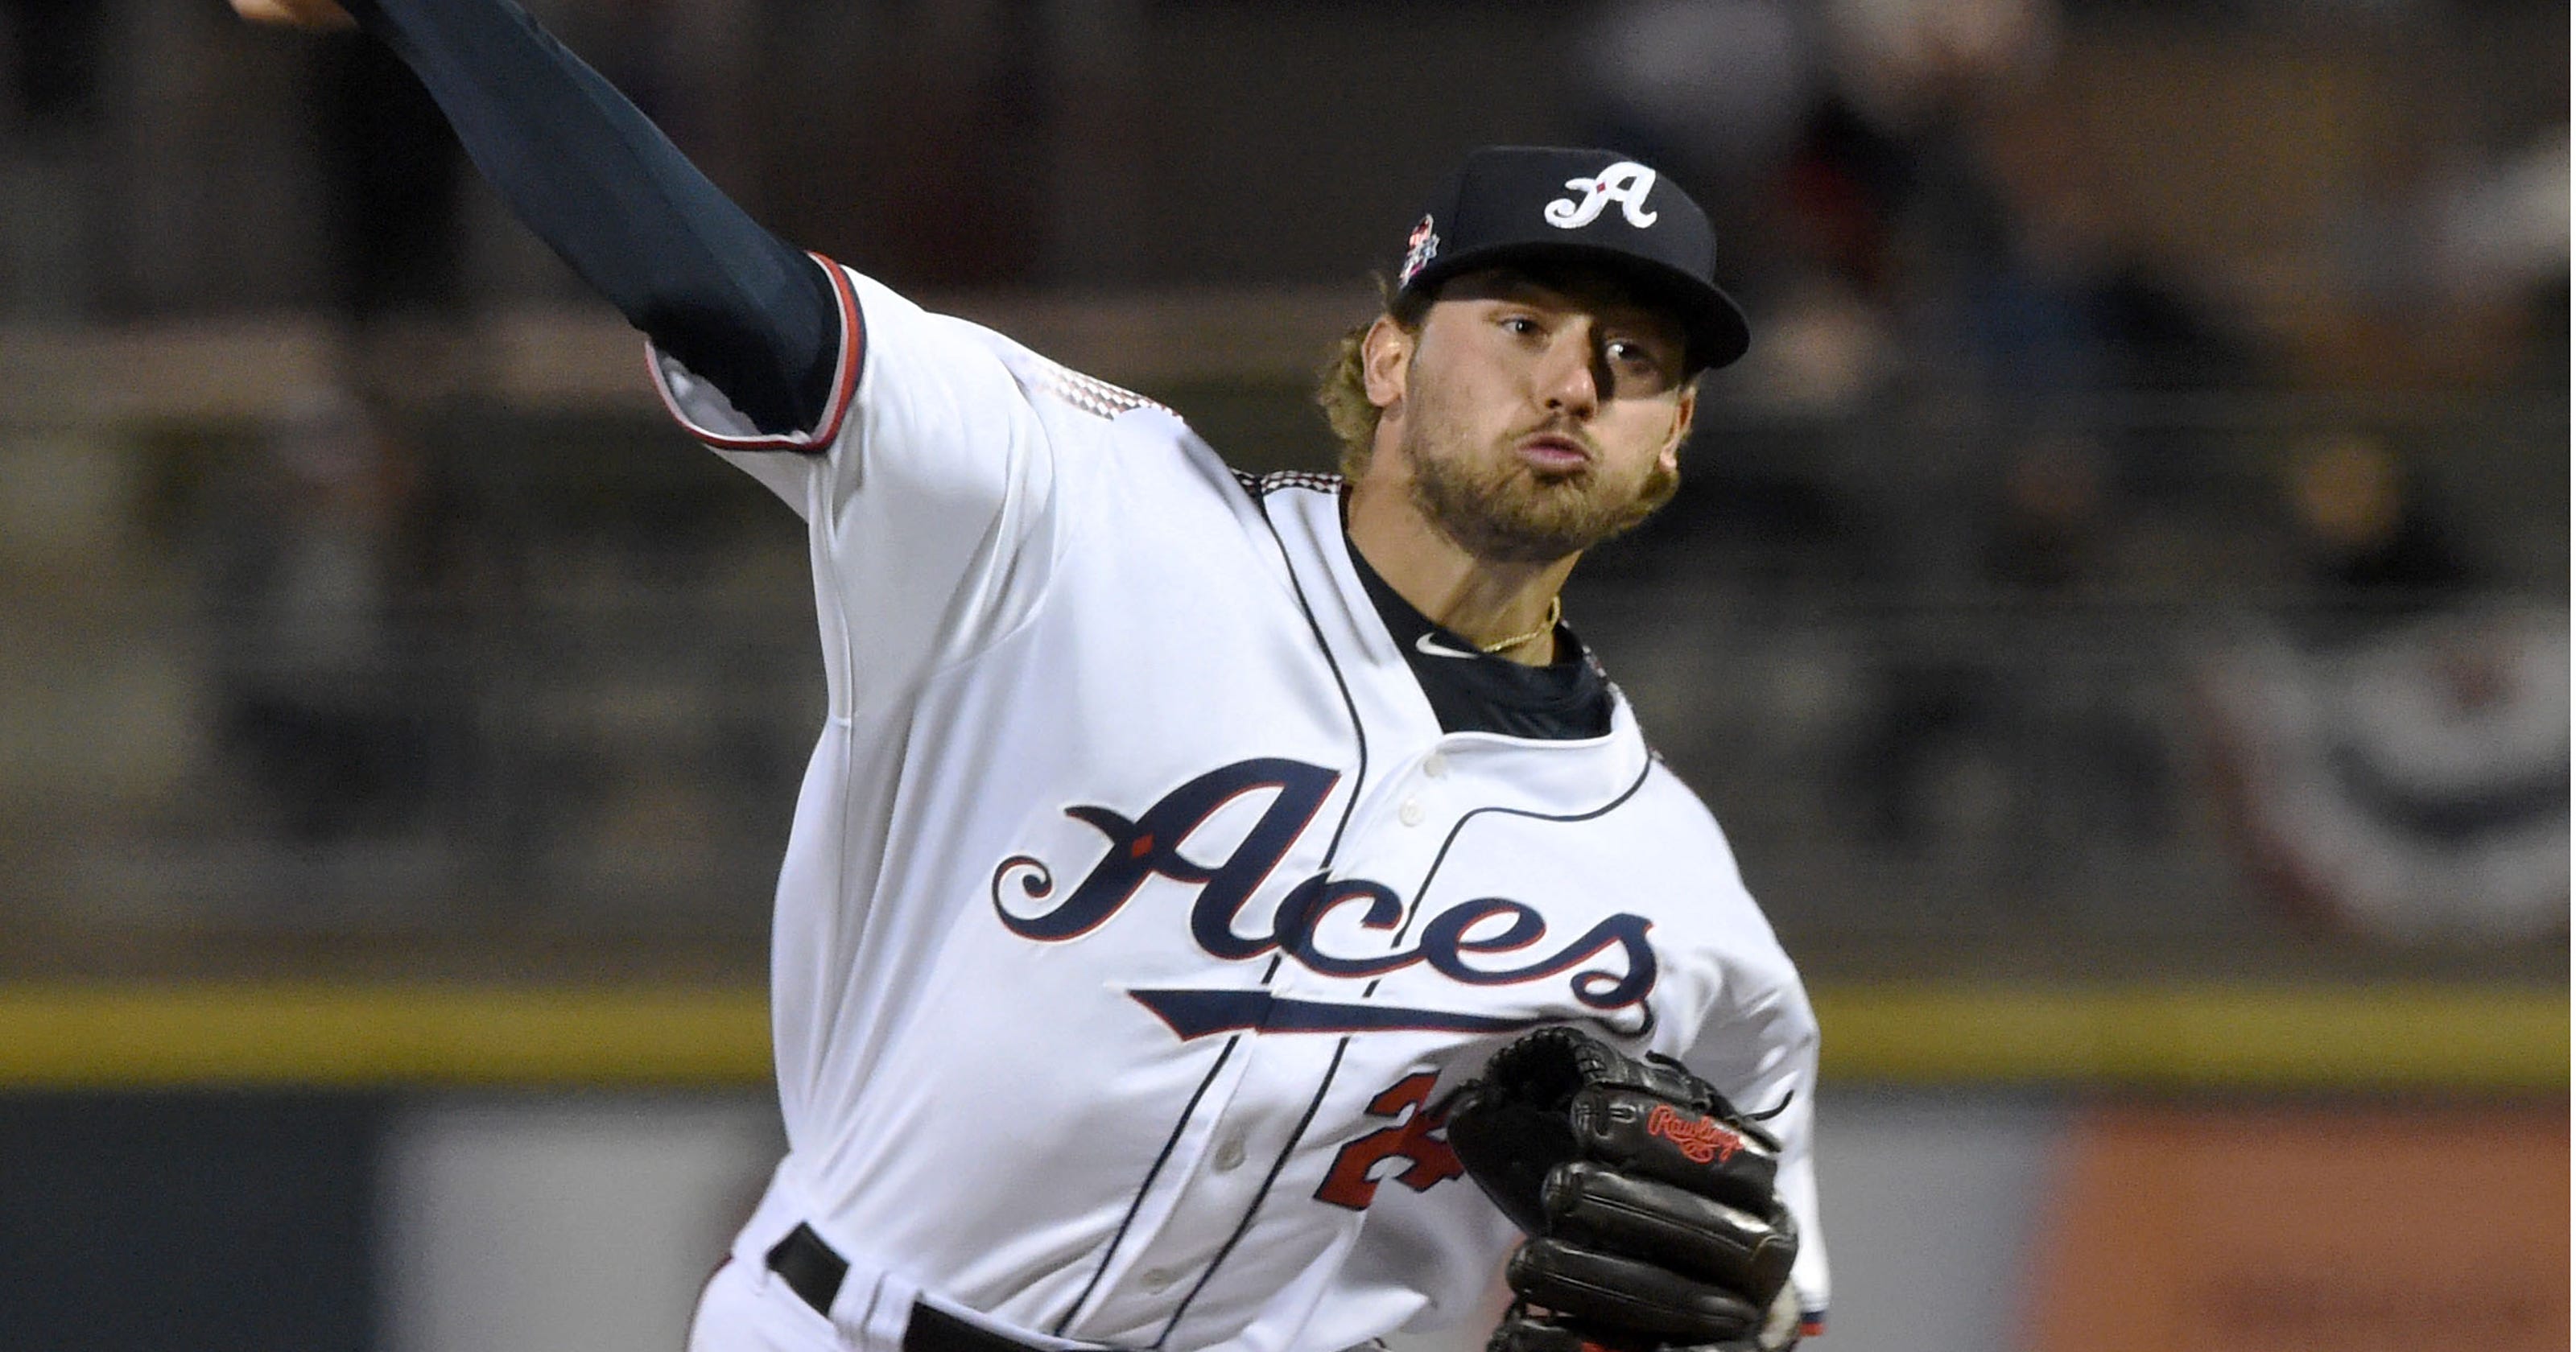 The Reno Aces kicked off their 10th season with a 102 win over Fresno